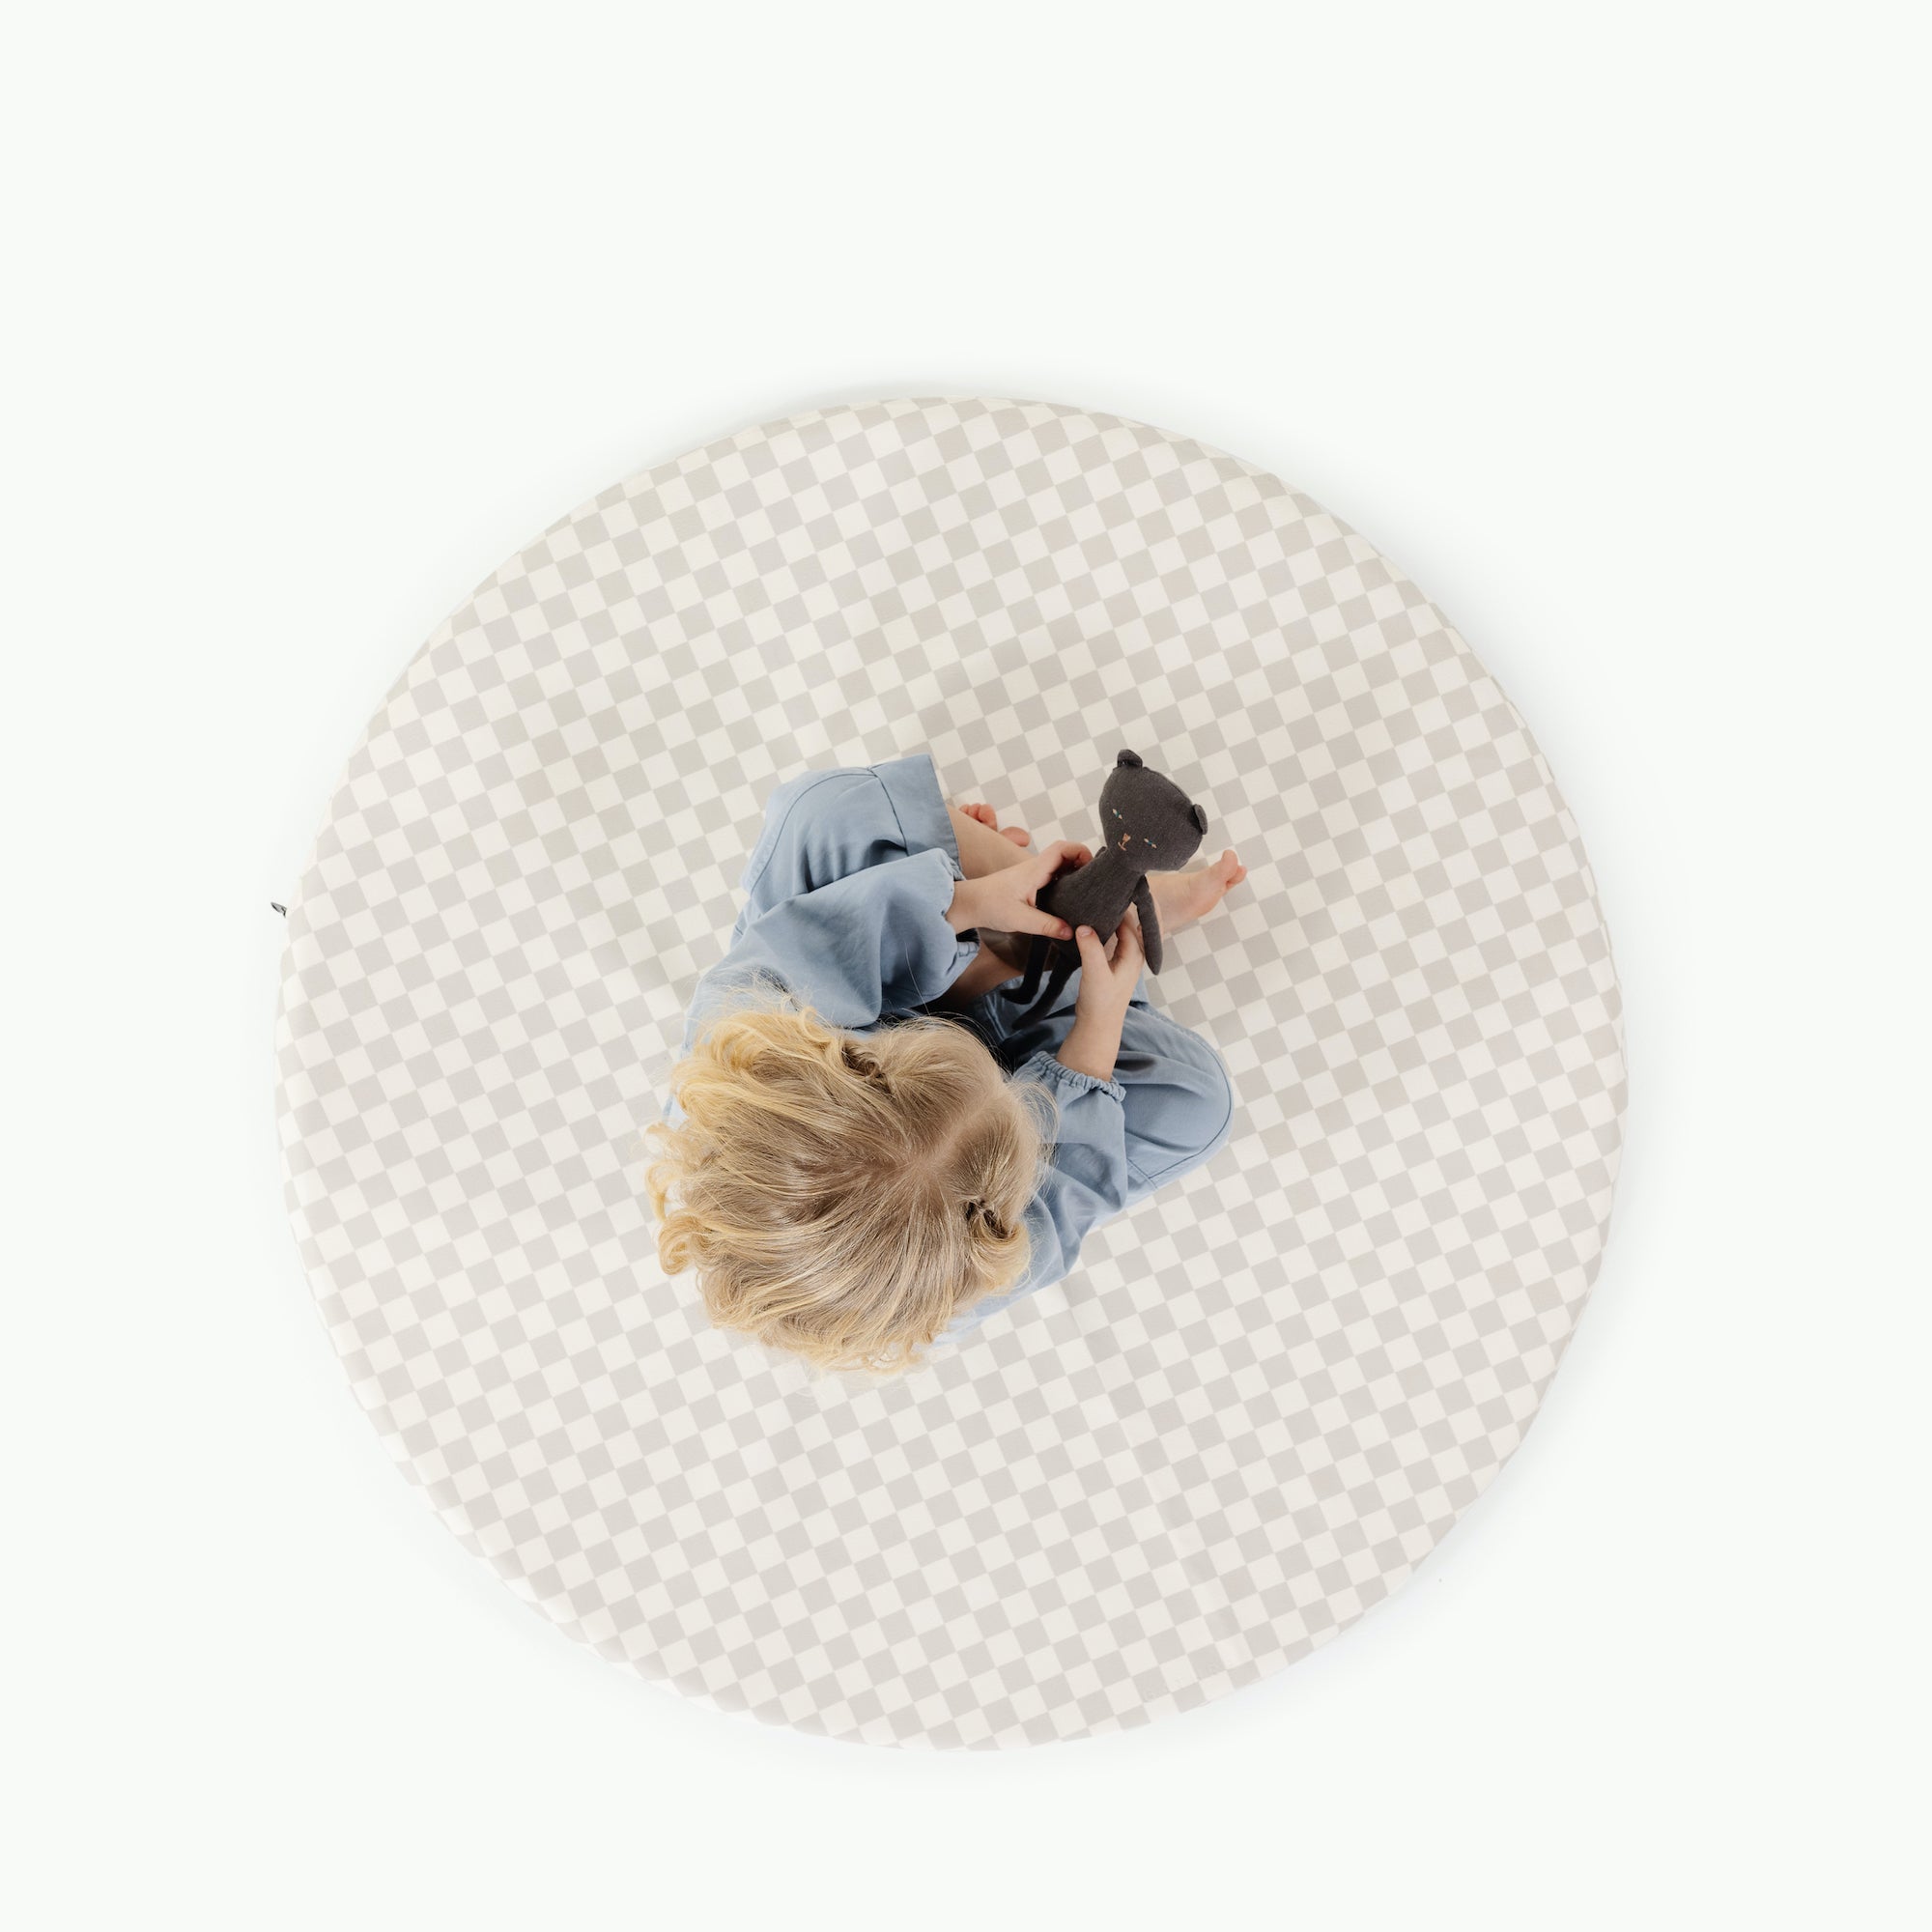 Rook / Circle@overhead of little girl playing on padded mat